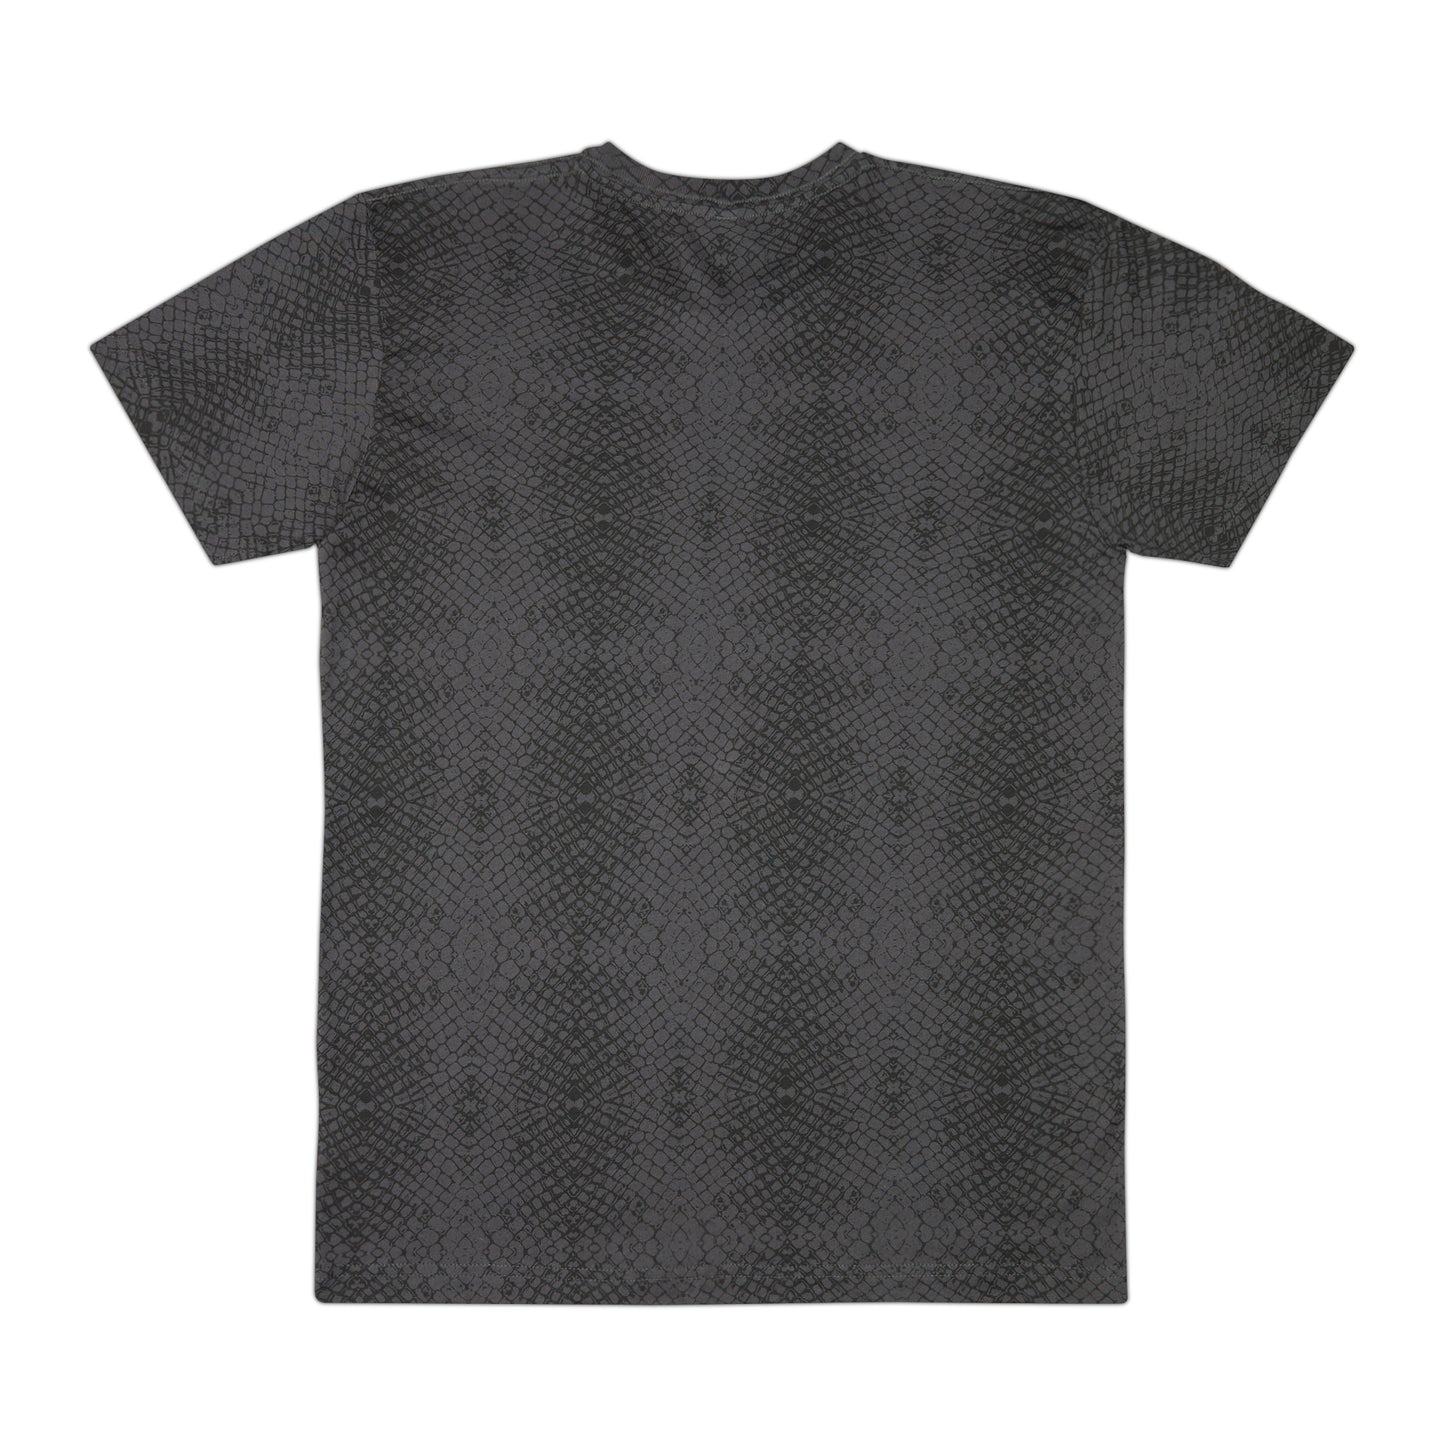 Men's Fine Ride Jersey Tee With Print Options